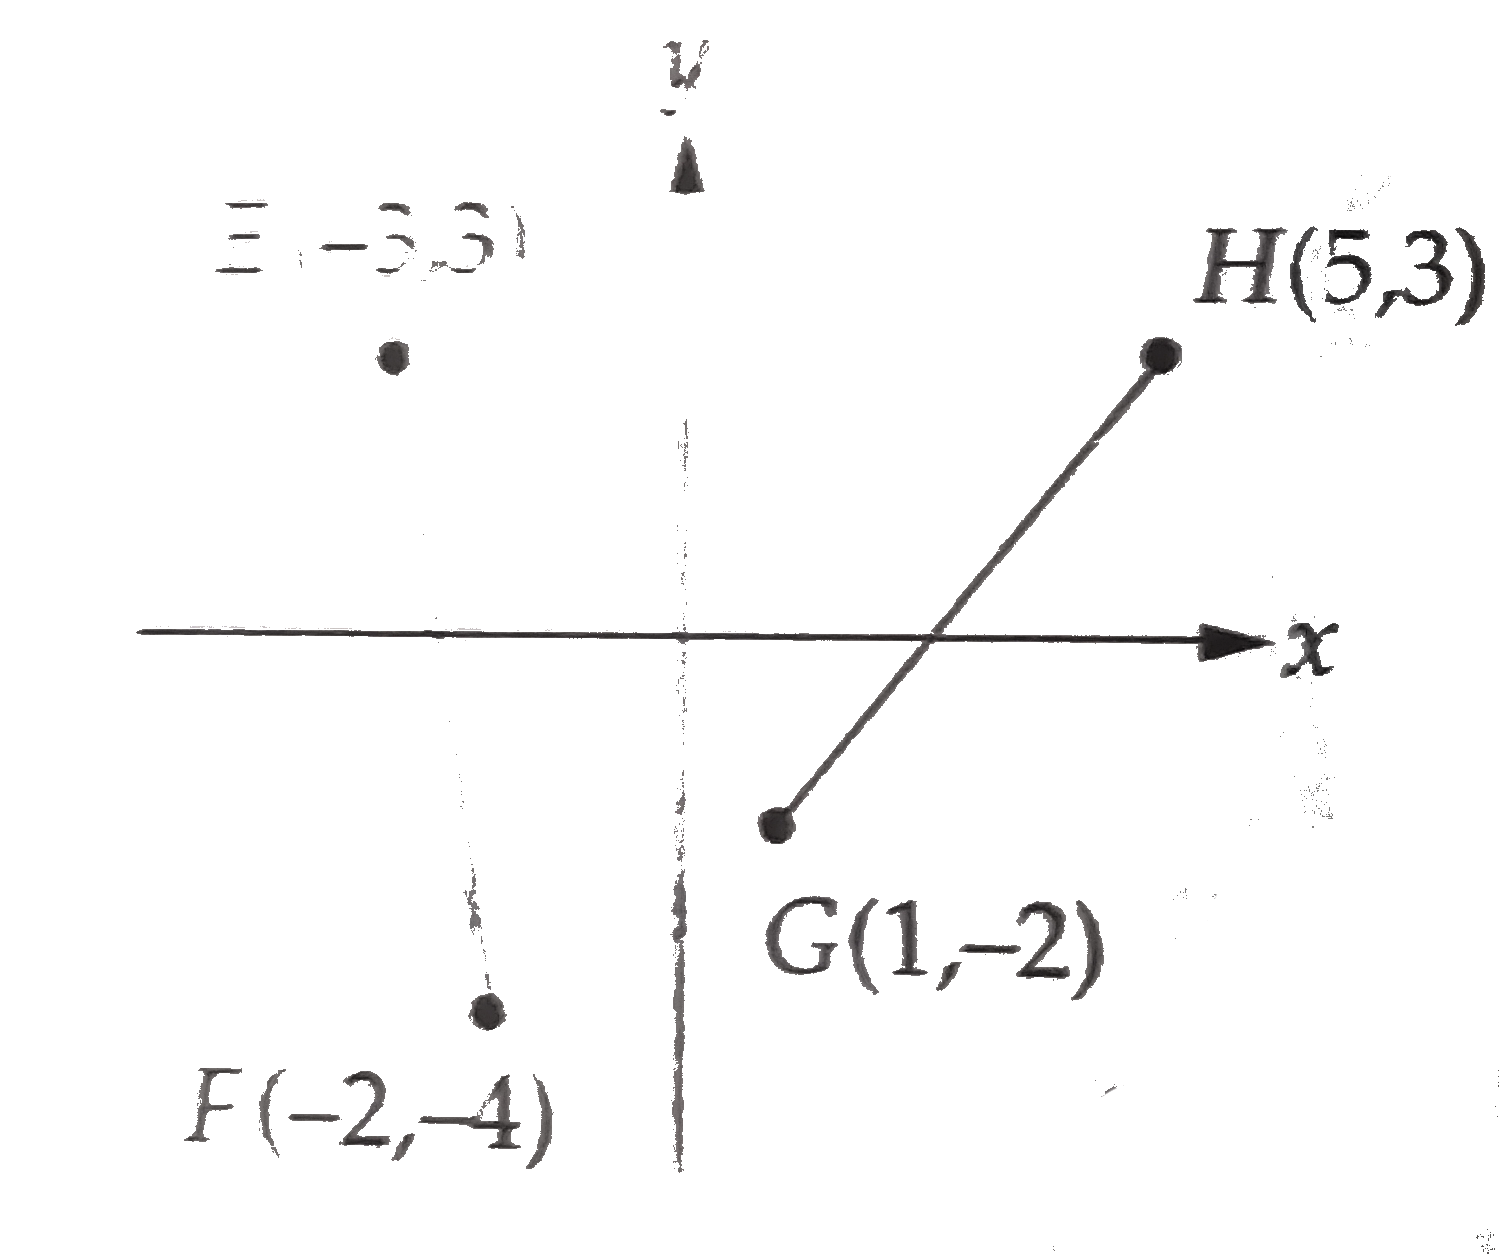 What is the distance from the midpoint of bar(EF) to the midpoint of bar(GH)  ?